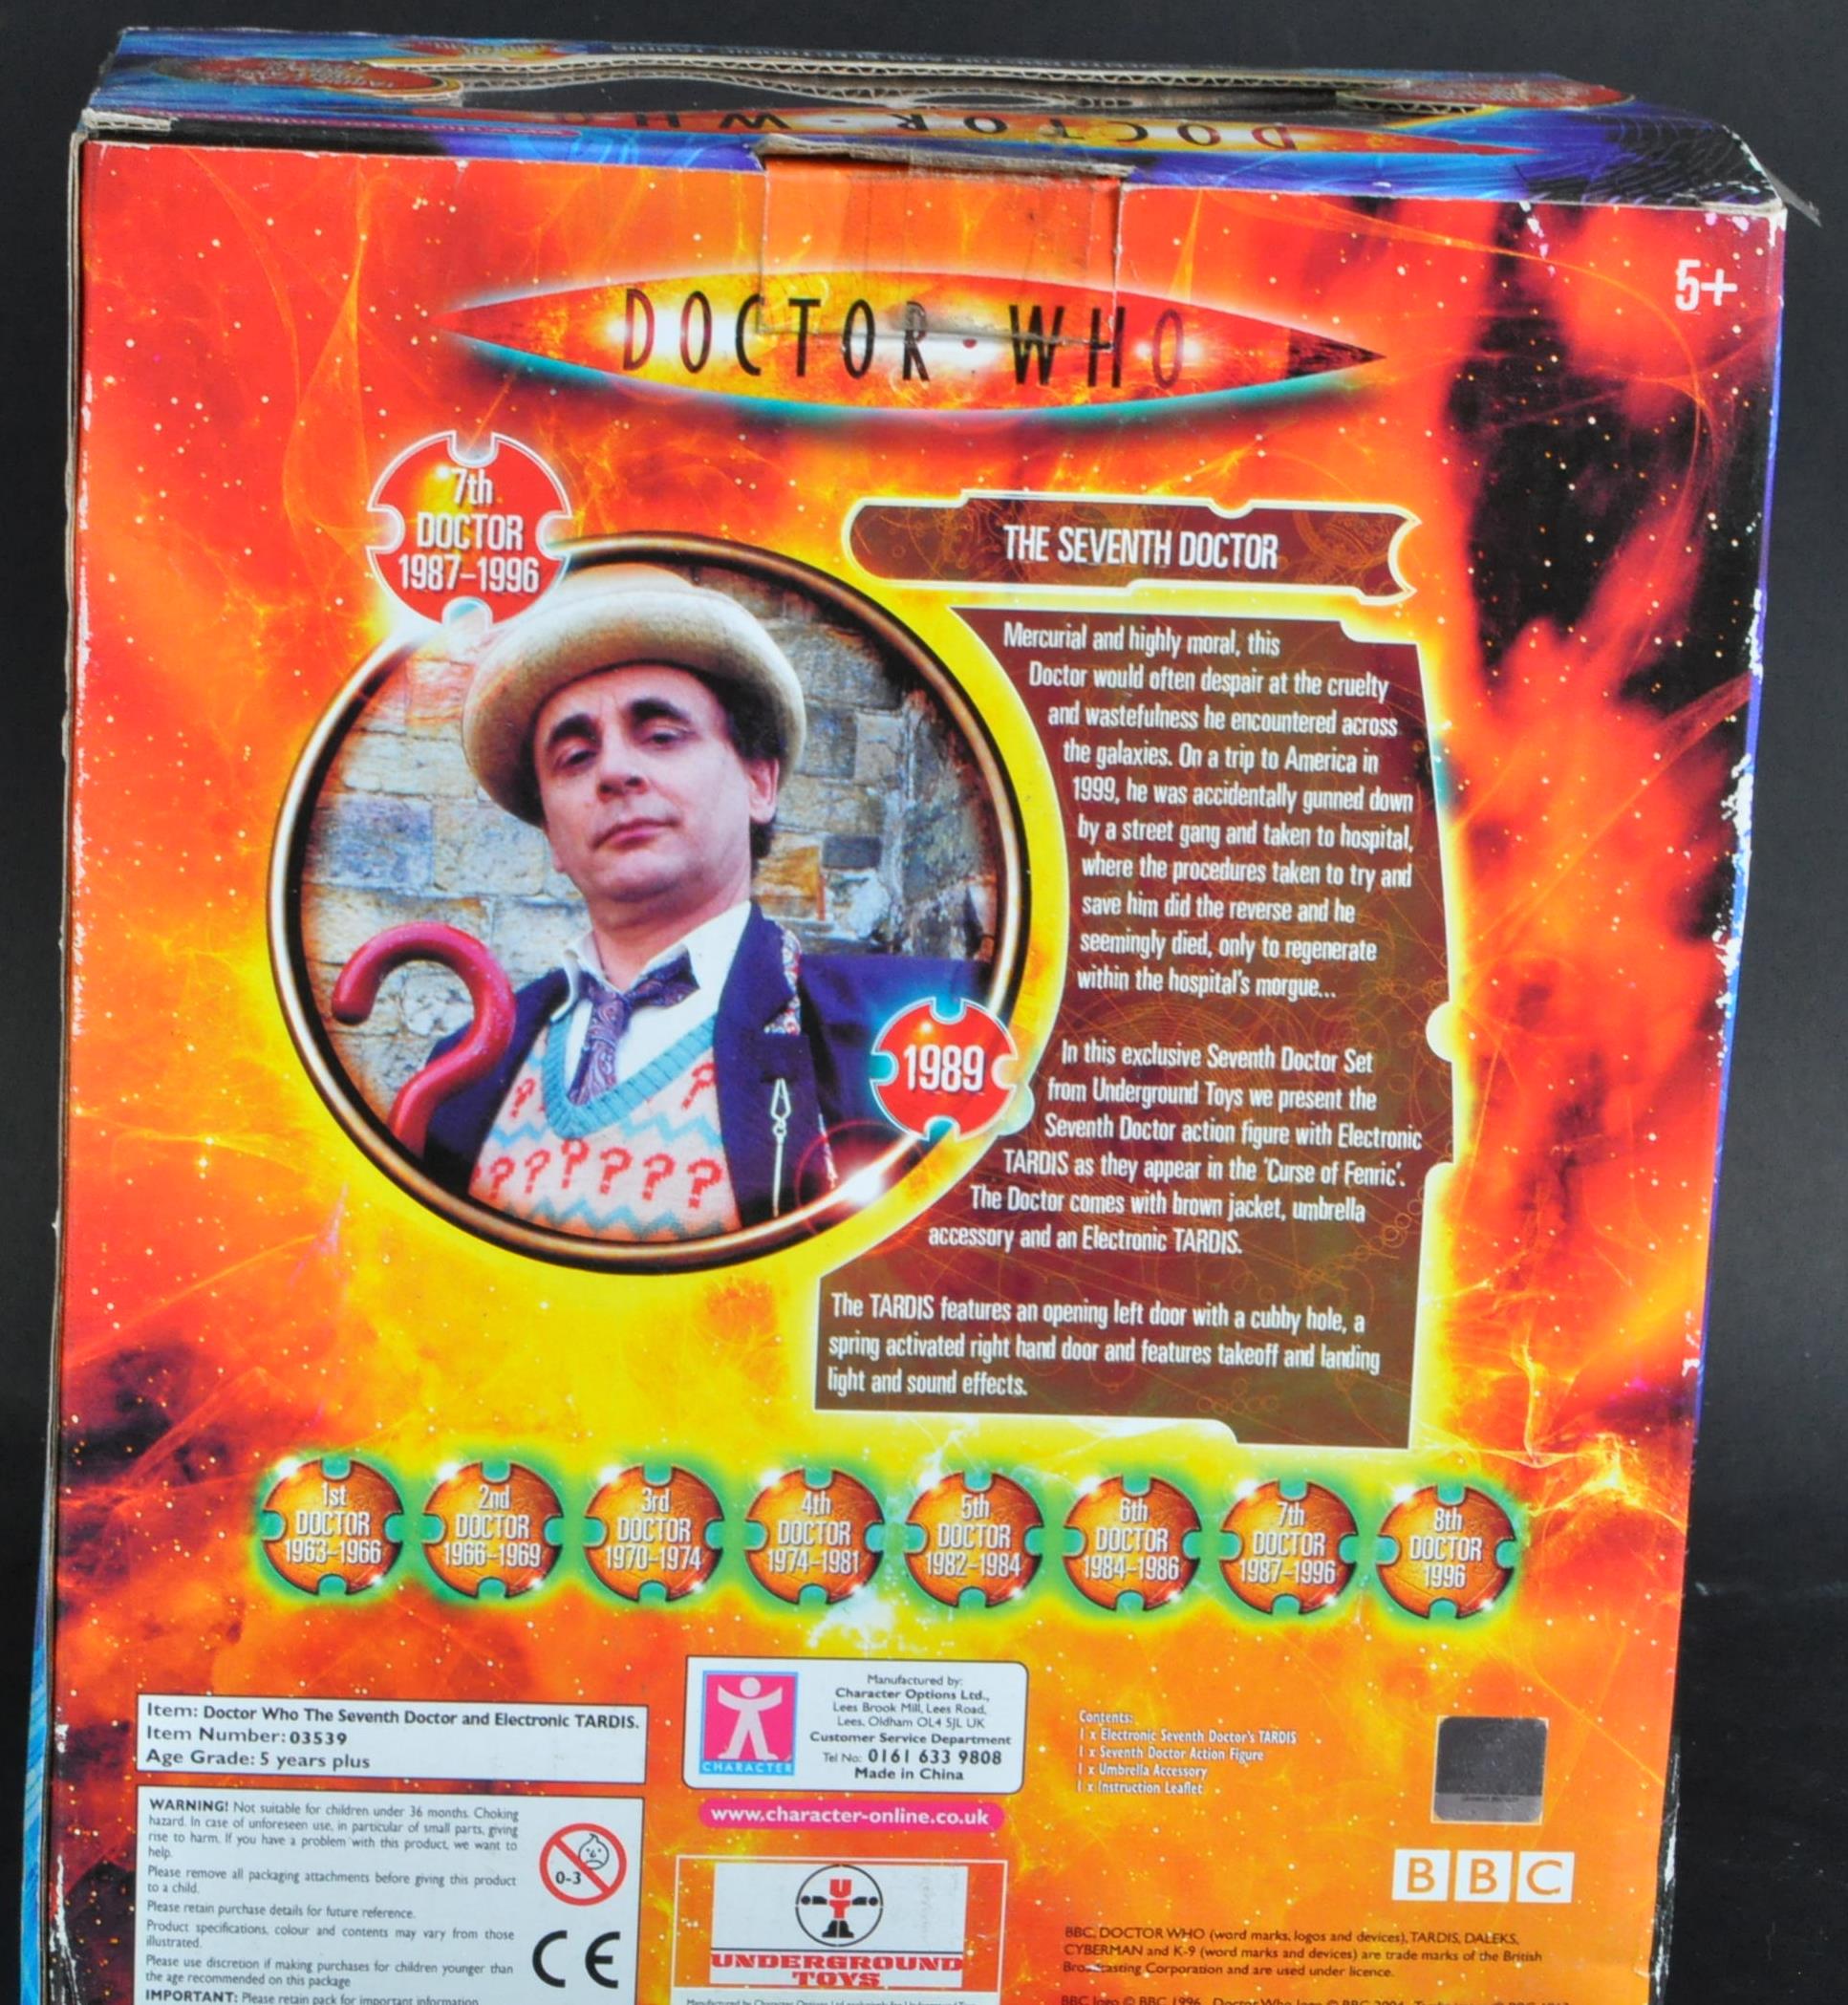 DOCTOR WHO - UNDERGROUND TOYS - SEVENTH DOCTOR ELECTRONIC TARDIS - Image 5 of 5